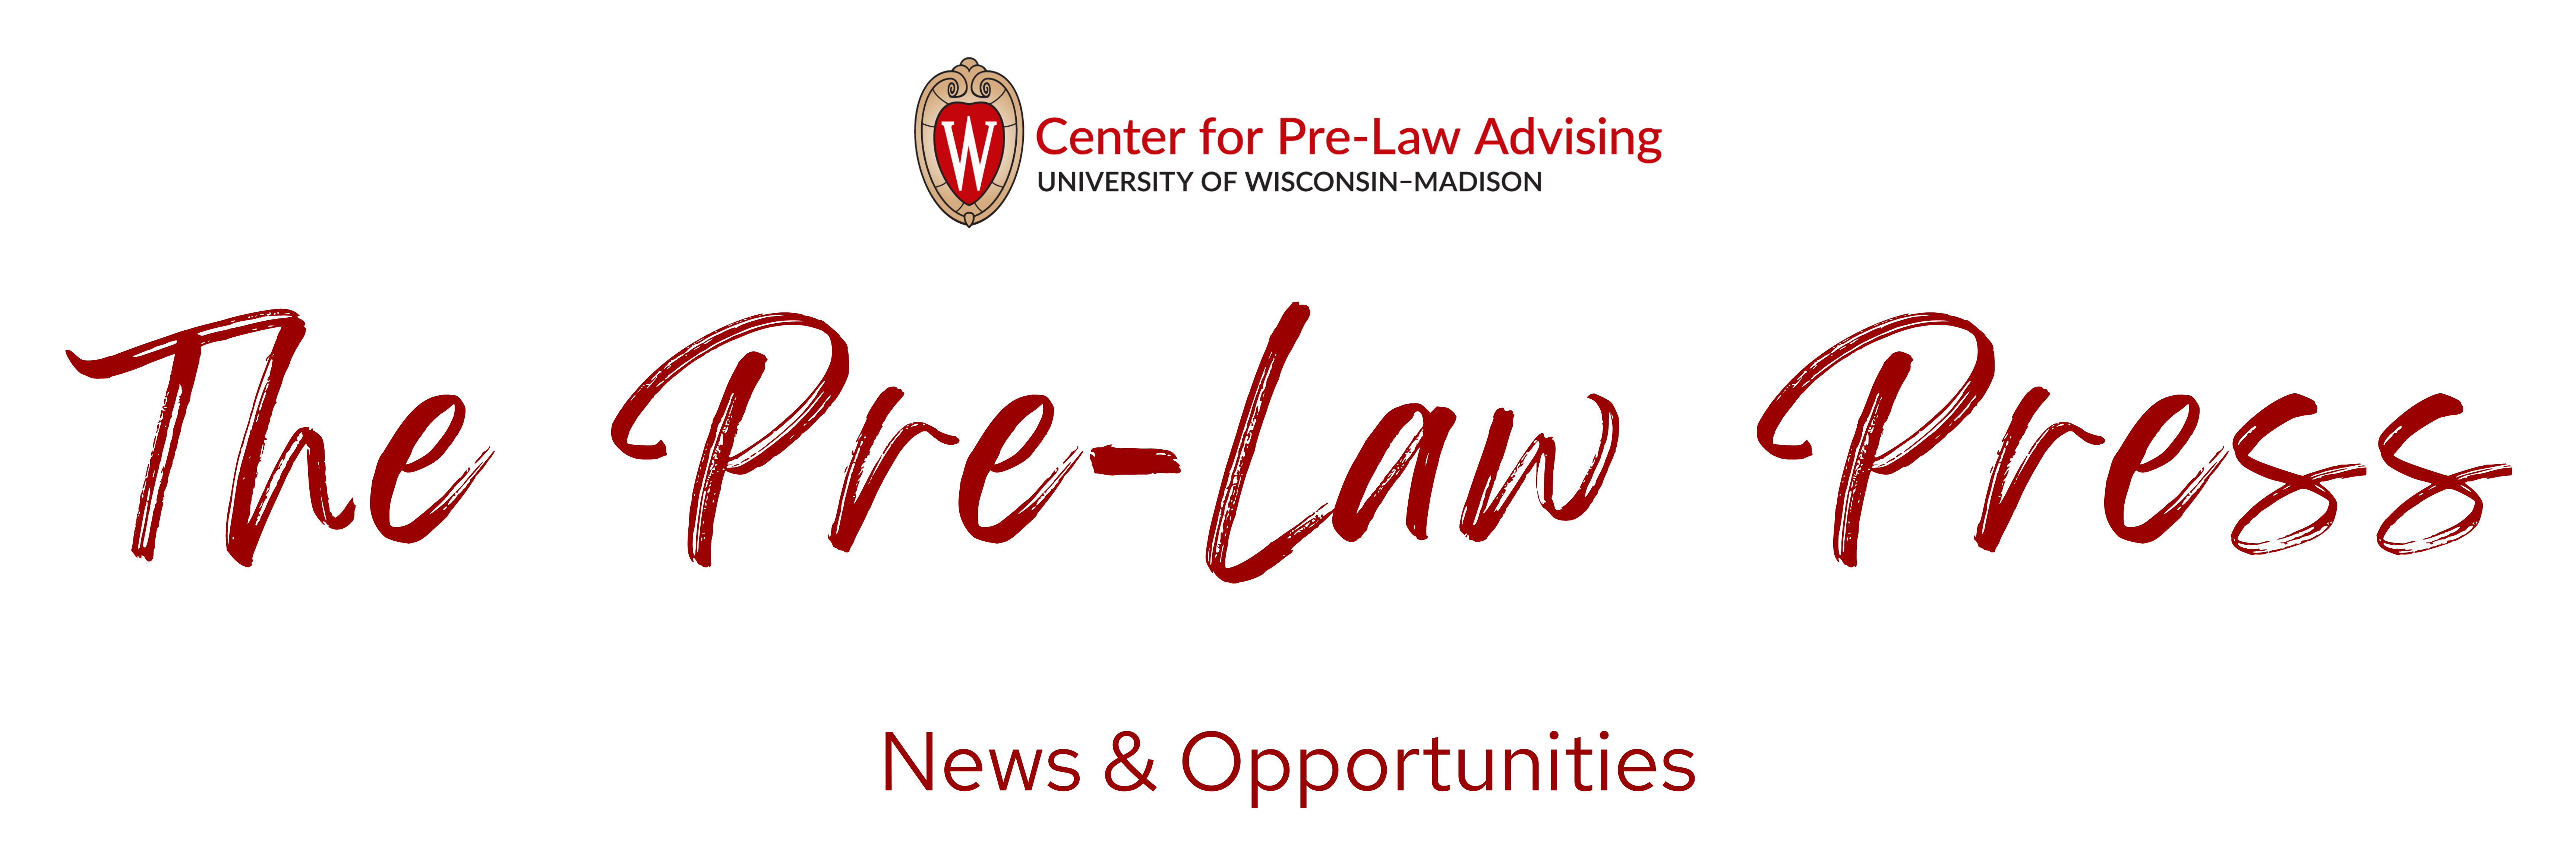 Banner with a transparent background and red words that say "The Pre-Law Press - News & Opportunities"